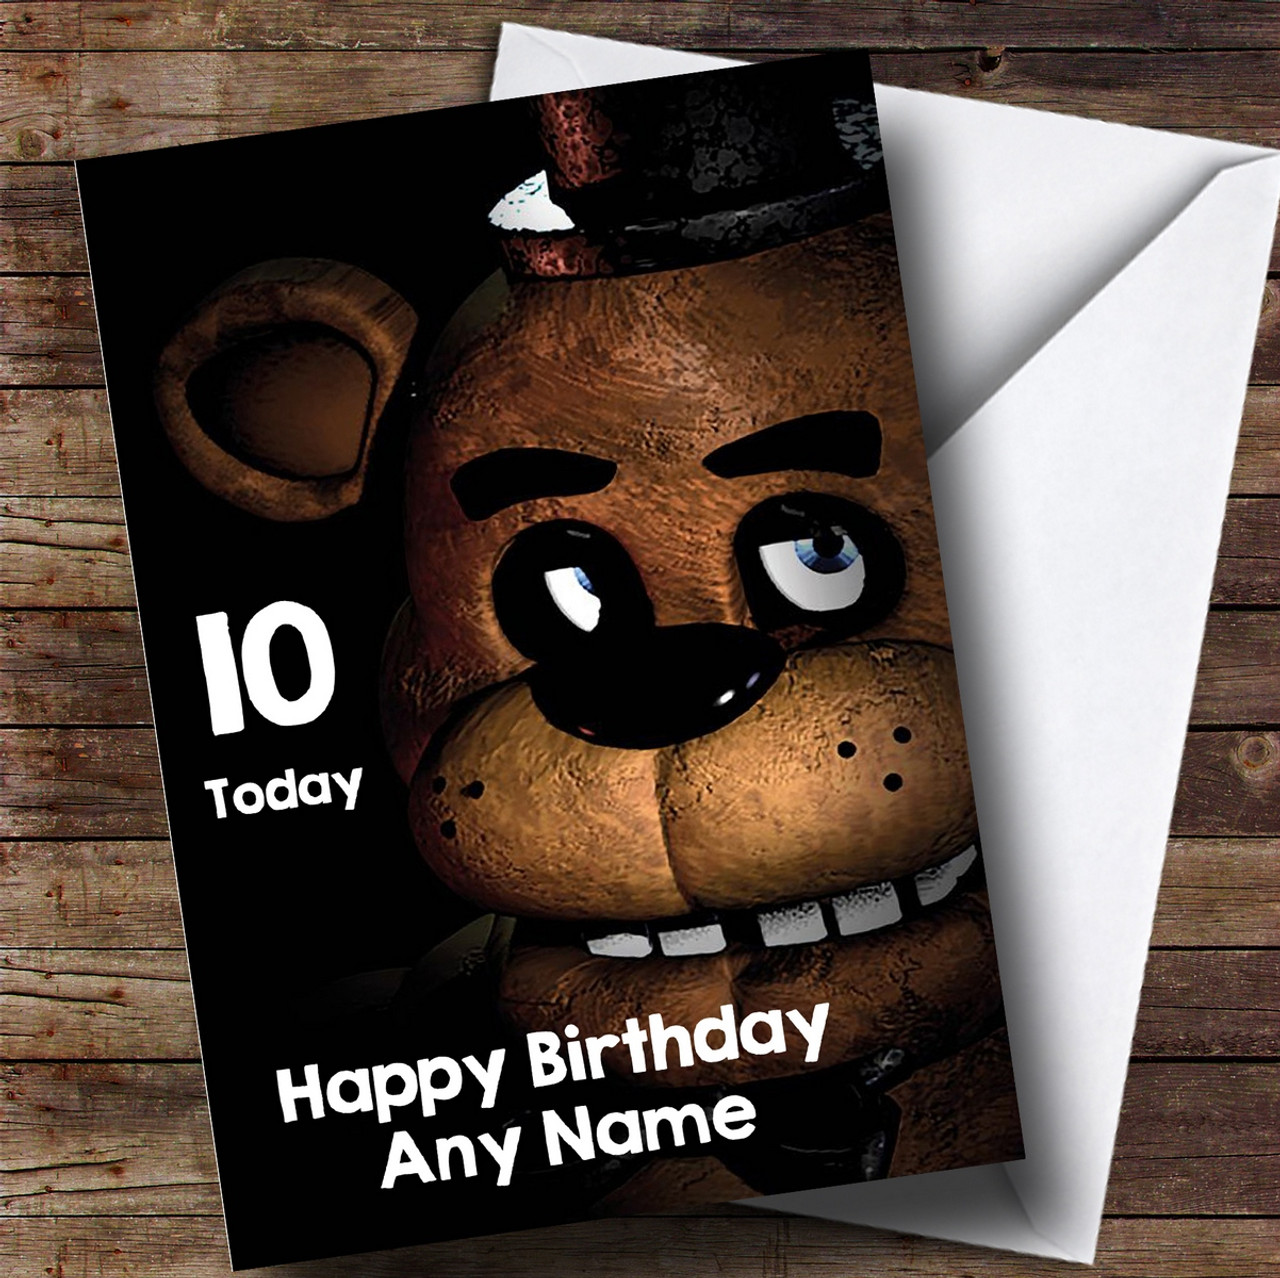 Personalized Fnaf Five Nights At Freddy's Golden Freddy Children's